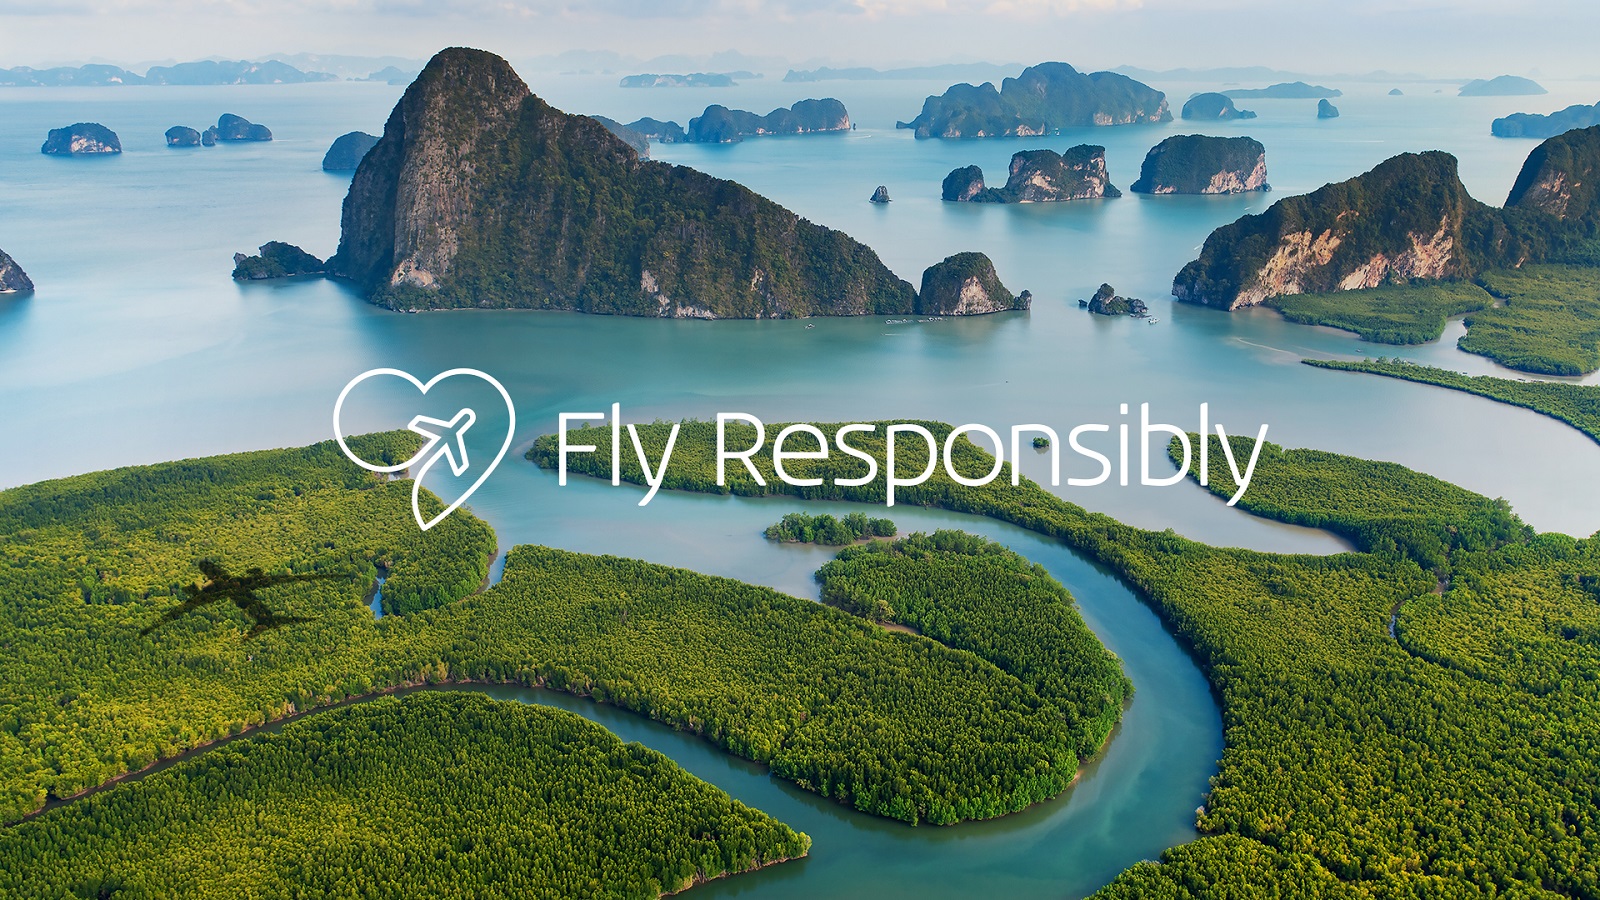 KLM Asks People to Fly Responsibly, even Competitors